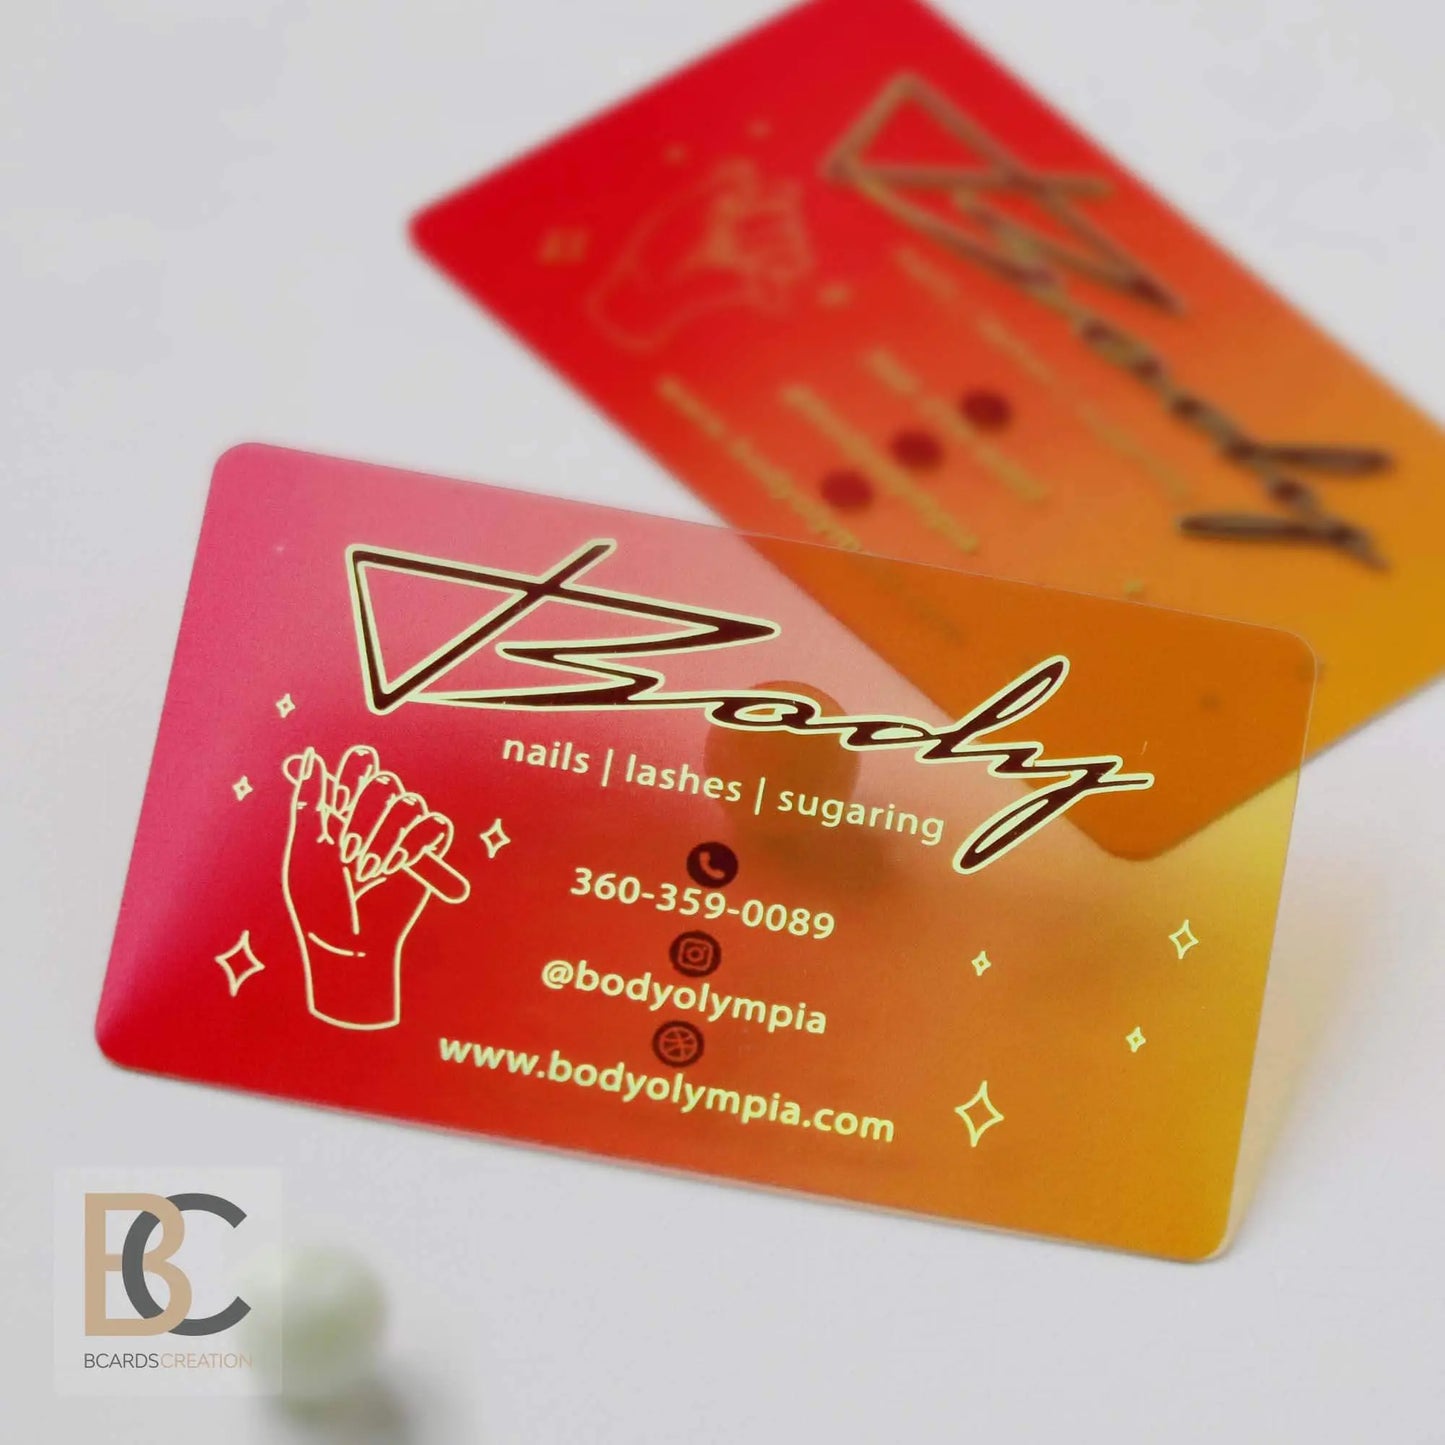 Full color clear business cards  Gold and Black foils Body Olimpia